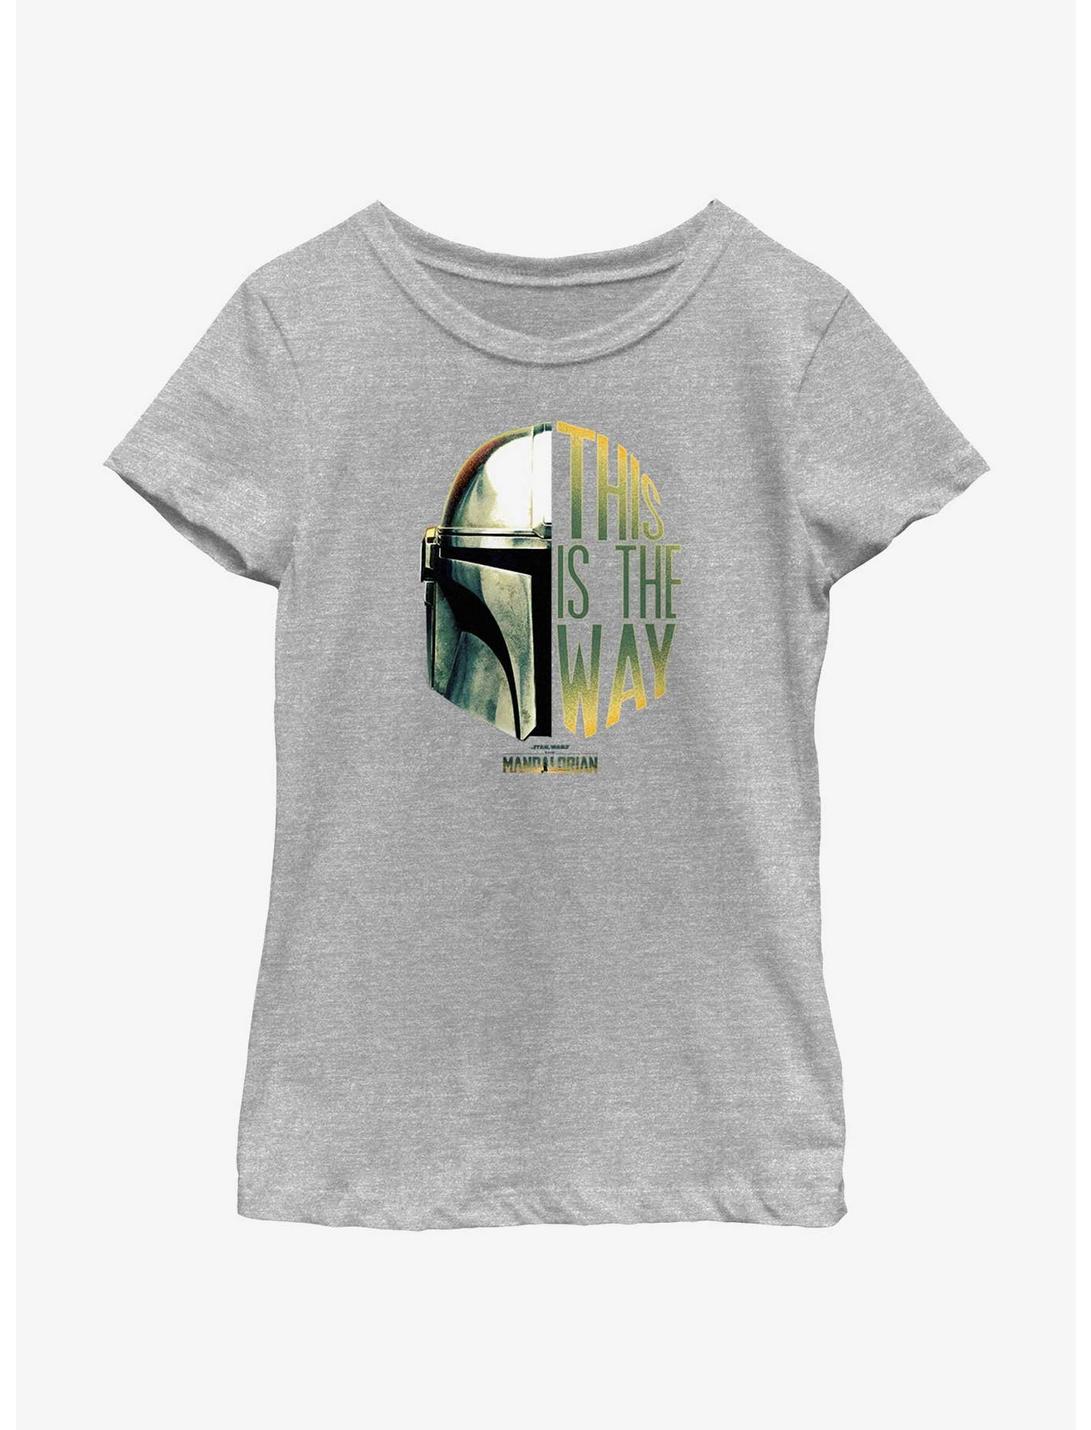 Star Wars The Mandalorian This Is The Way Helmet Split Youth Girls T-Shirt, ATH HTR, hi-res